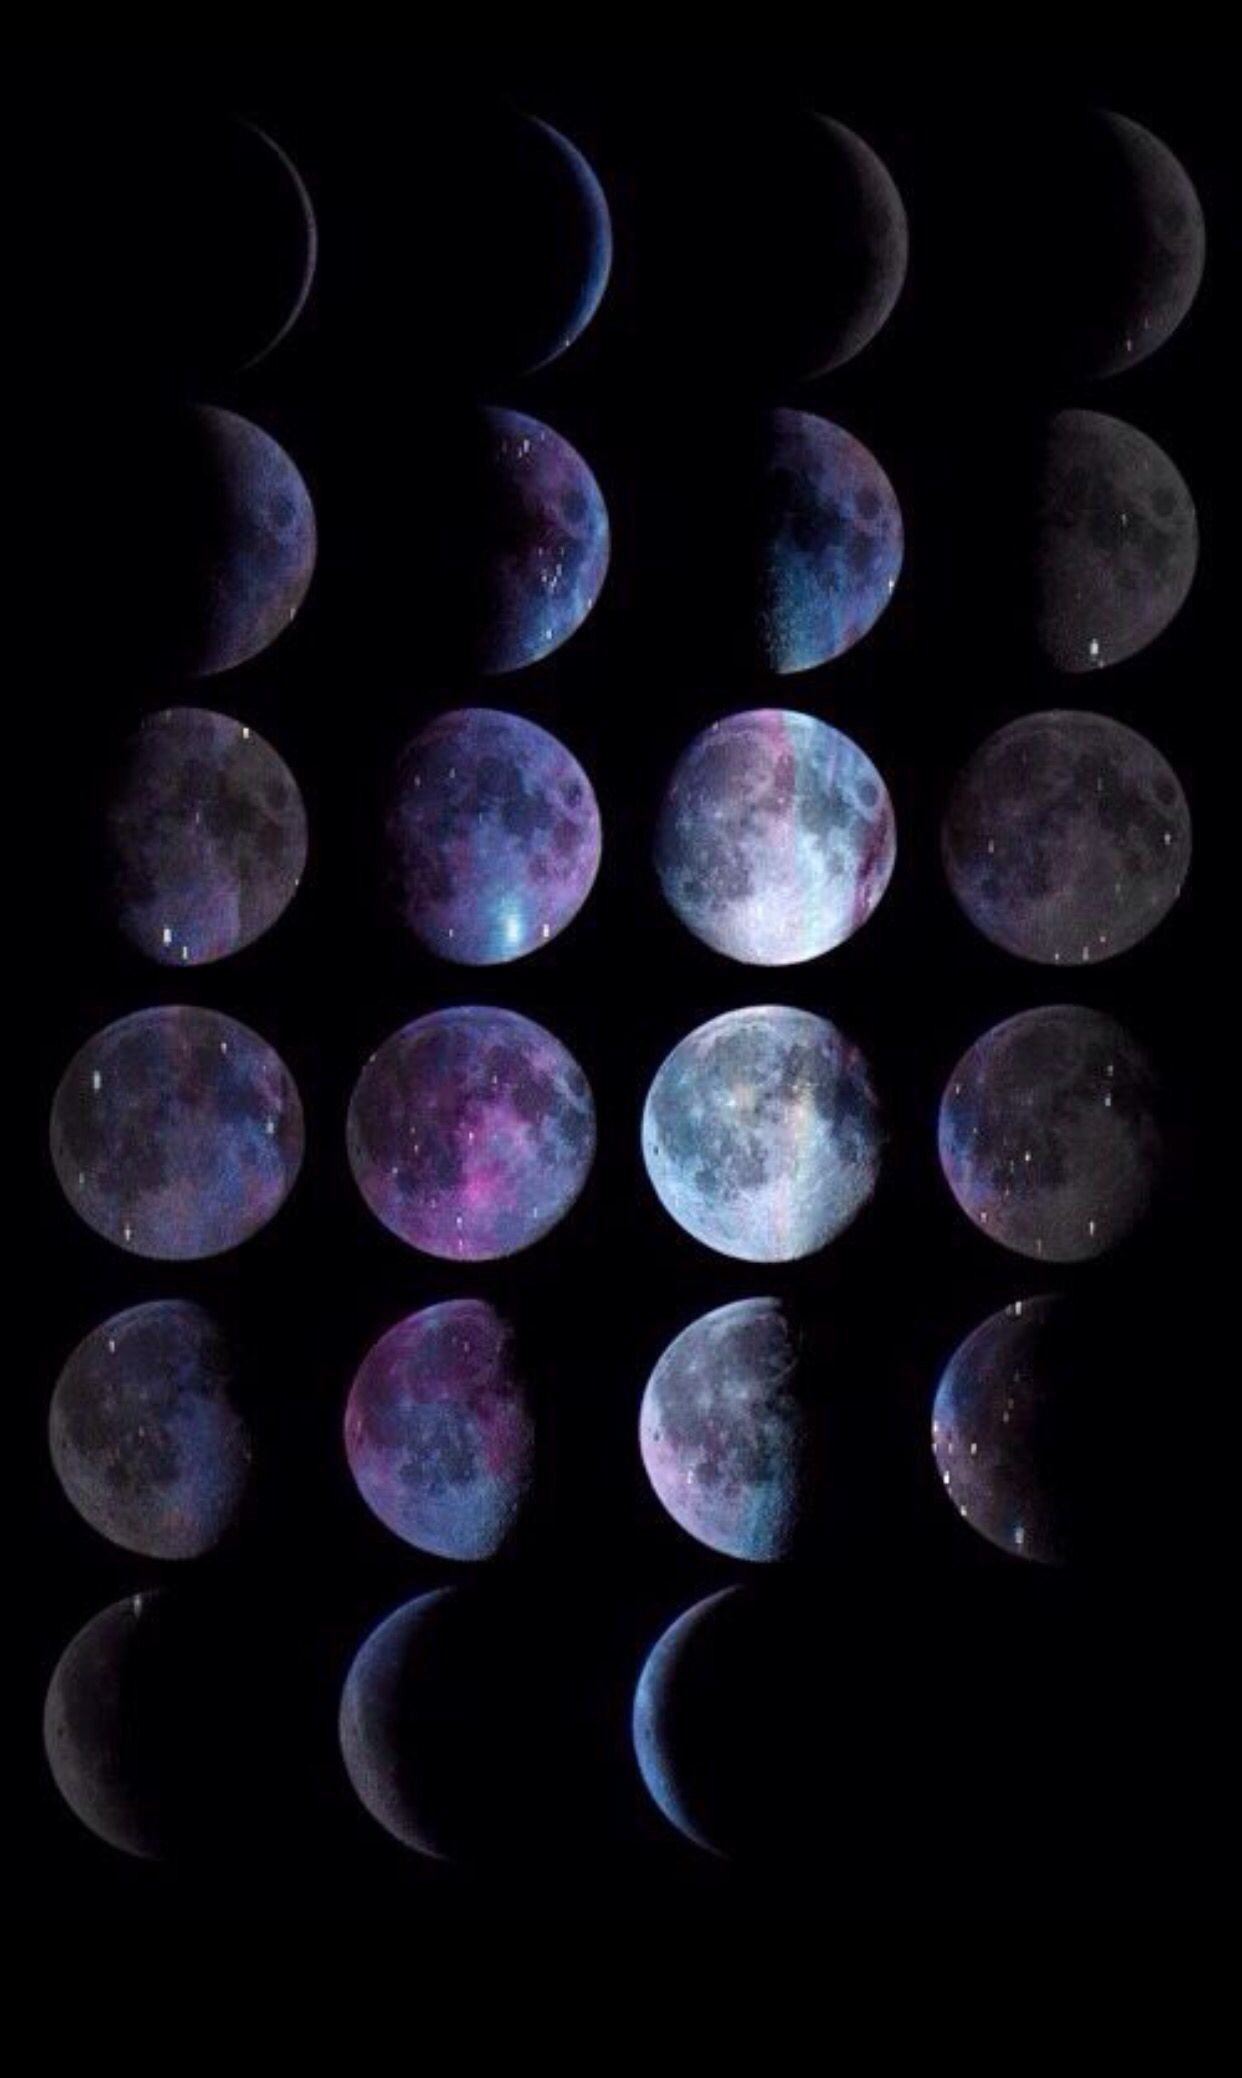 Iphone Wallpaper Moon, Goth Wallpaper, Galaxy Wallpaper, - Phases Of The Moon - HD Wallpaper 